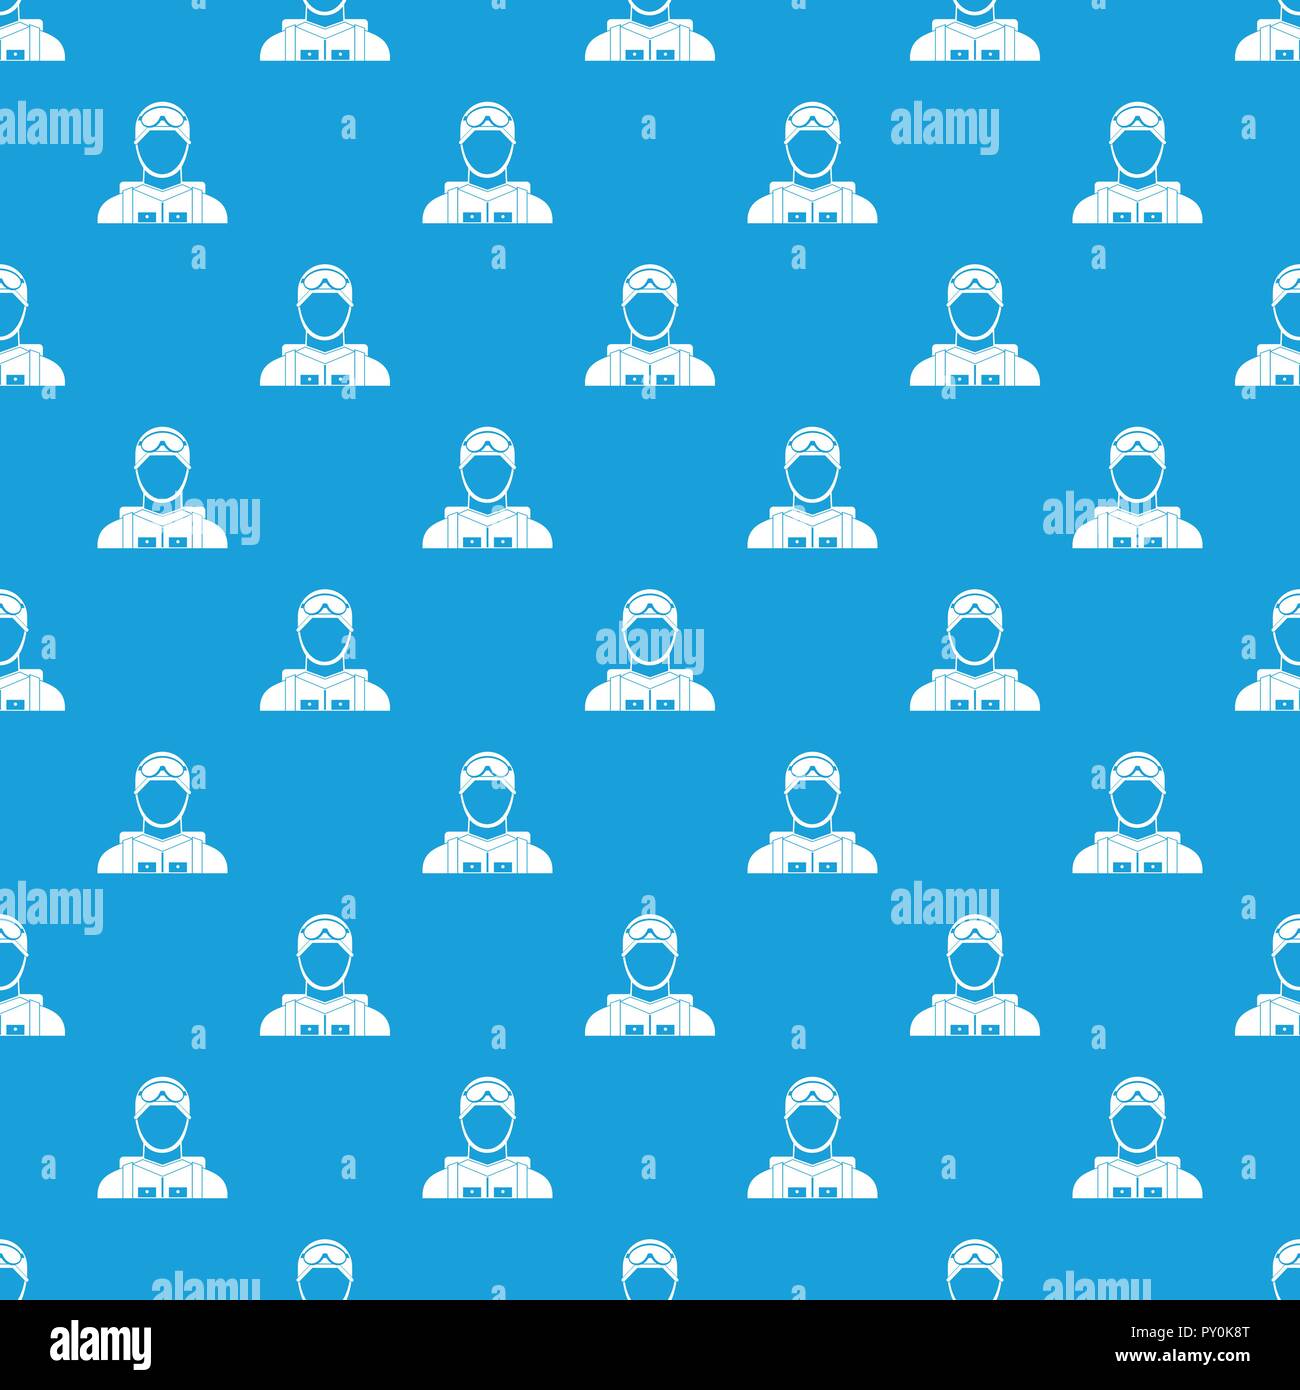 Military paratrooper pattern seamless blue Stock Vector